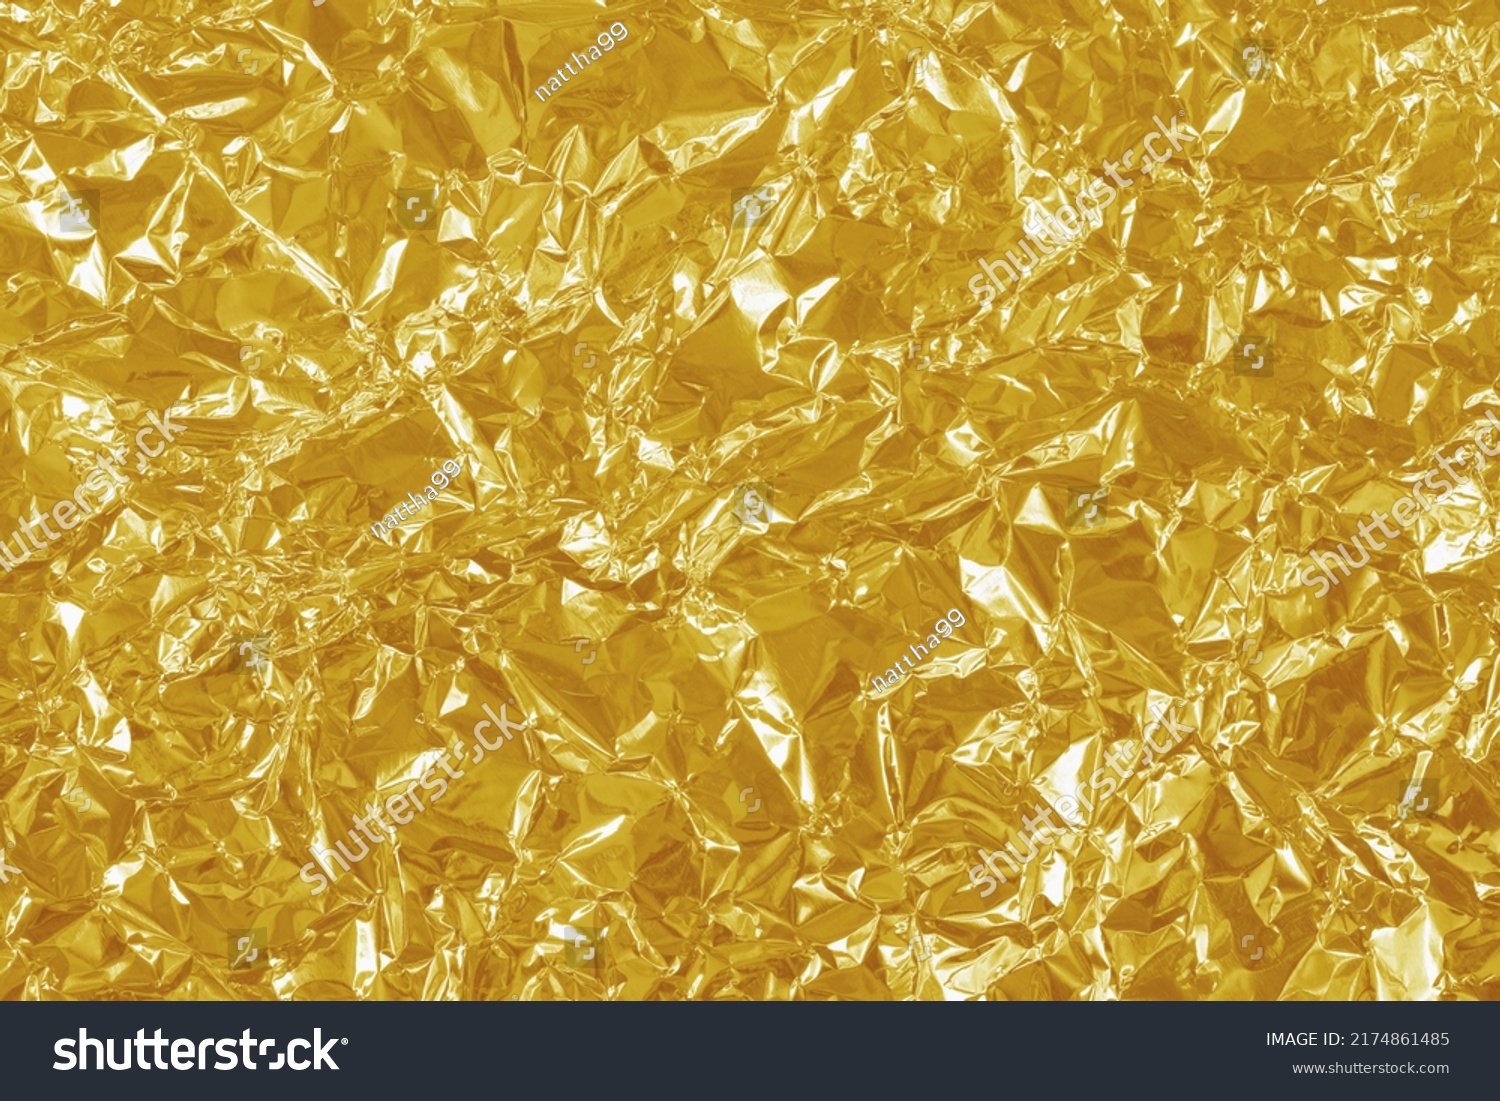 Gold foil leaf shiny texture, abstract yellow wrapping paper for background and design art work. #2174861485